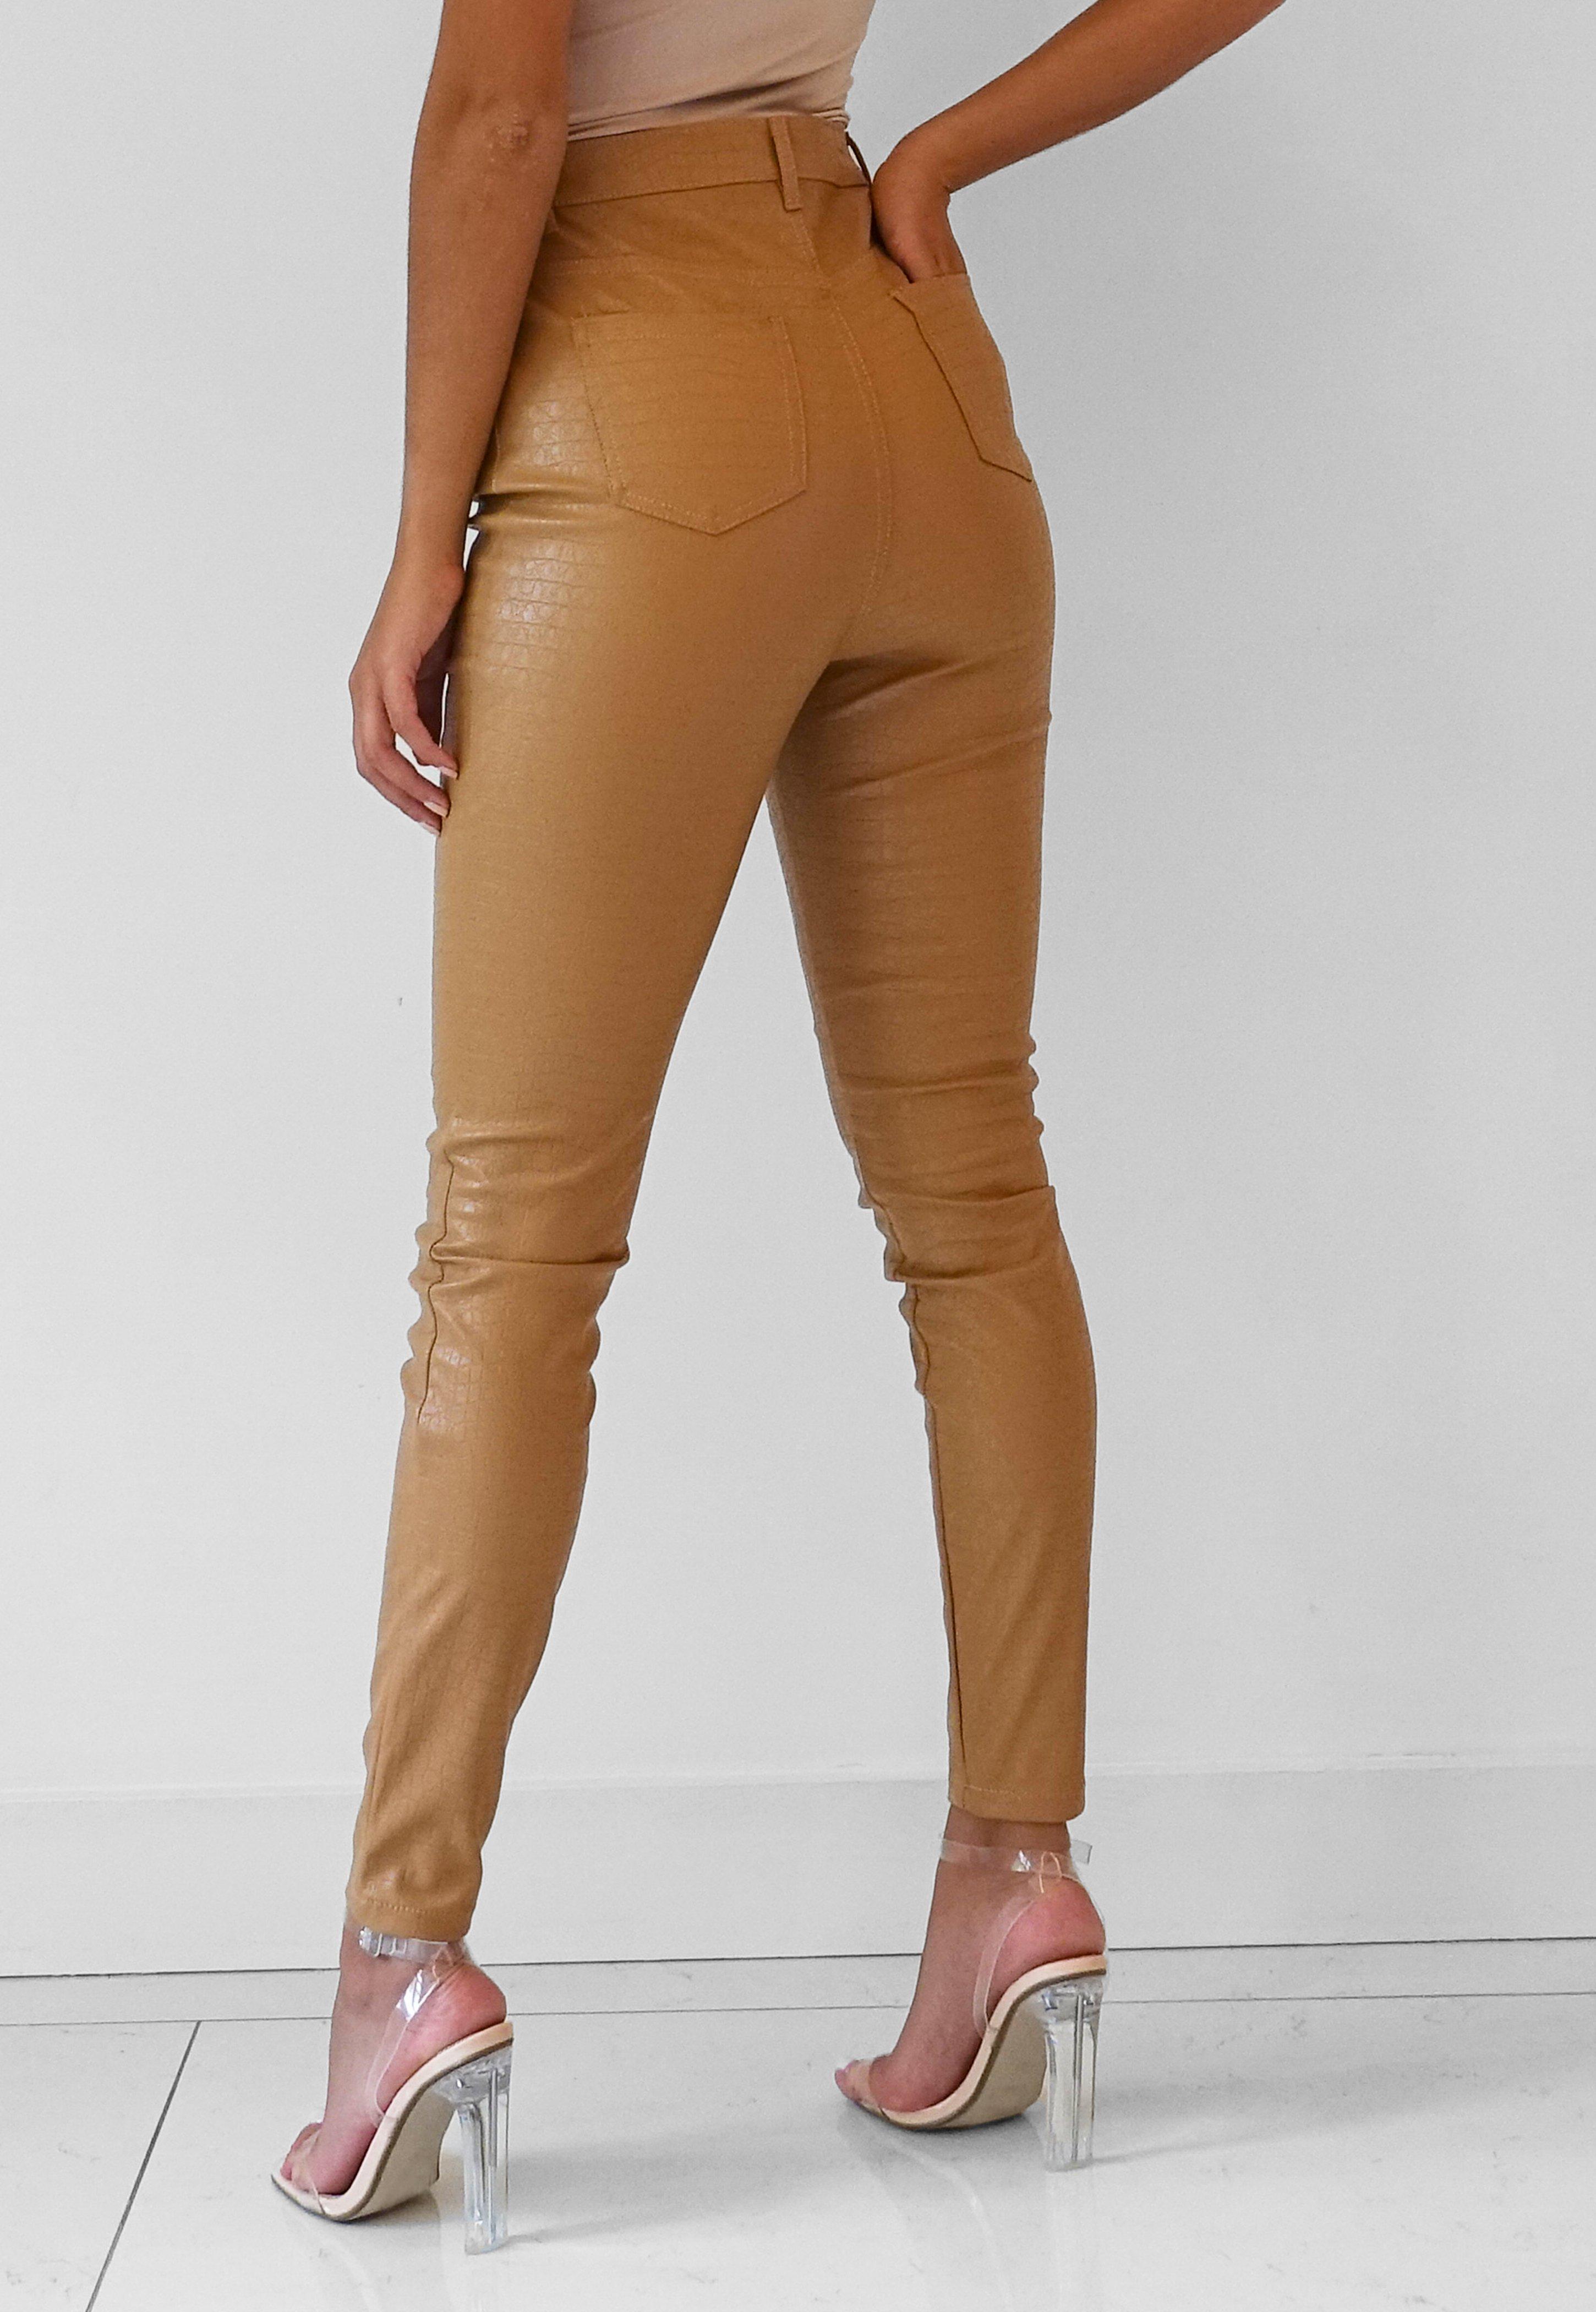 Missguided Tan Faux Leather Croc Skinny Pants in Brown - Lyst